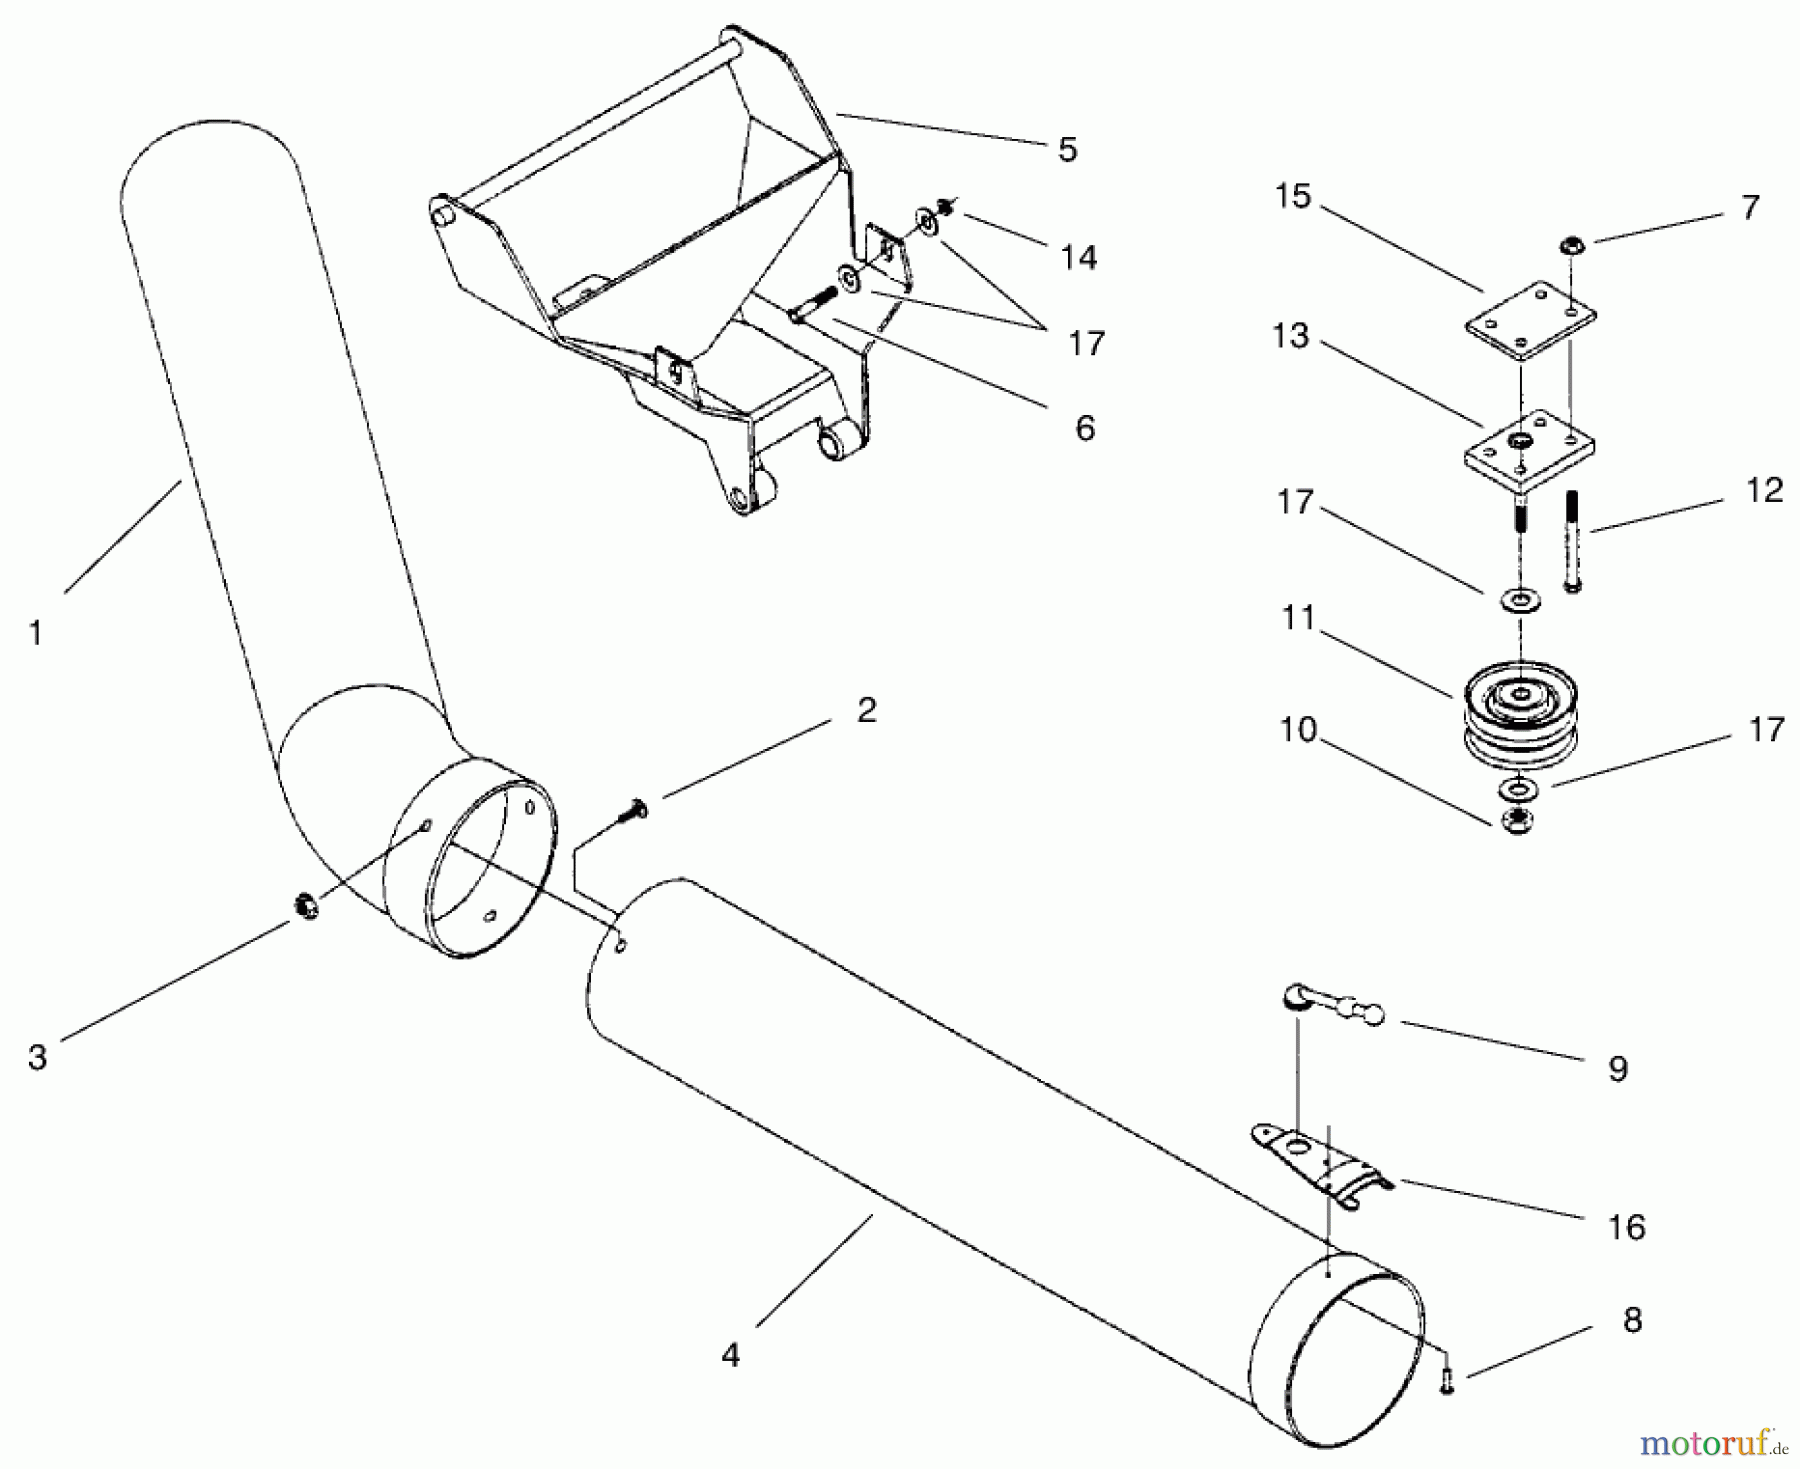  Toro Neu Accessories, Mower 79451 - Toro Quiet Collector, Wheel Horse 5xi Series Garden Tractors, 1998 (8900226-8999999) HITCH AND SUCTION TUBE ASSEMBLY